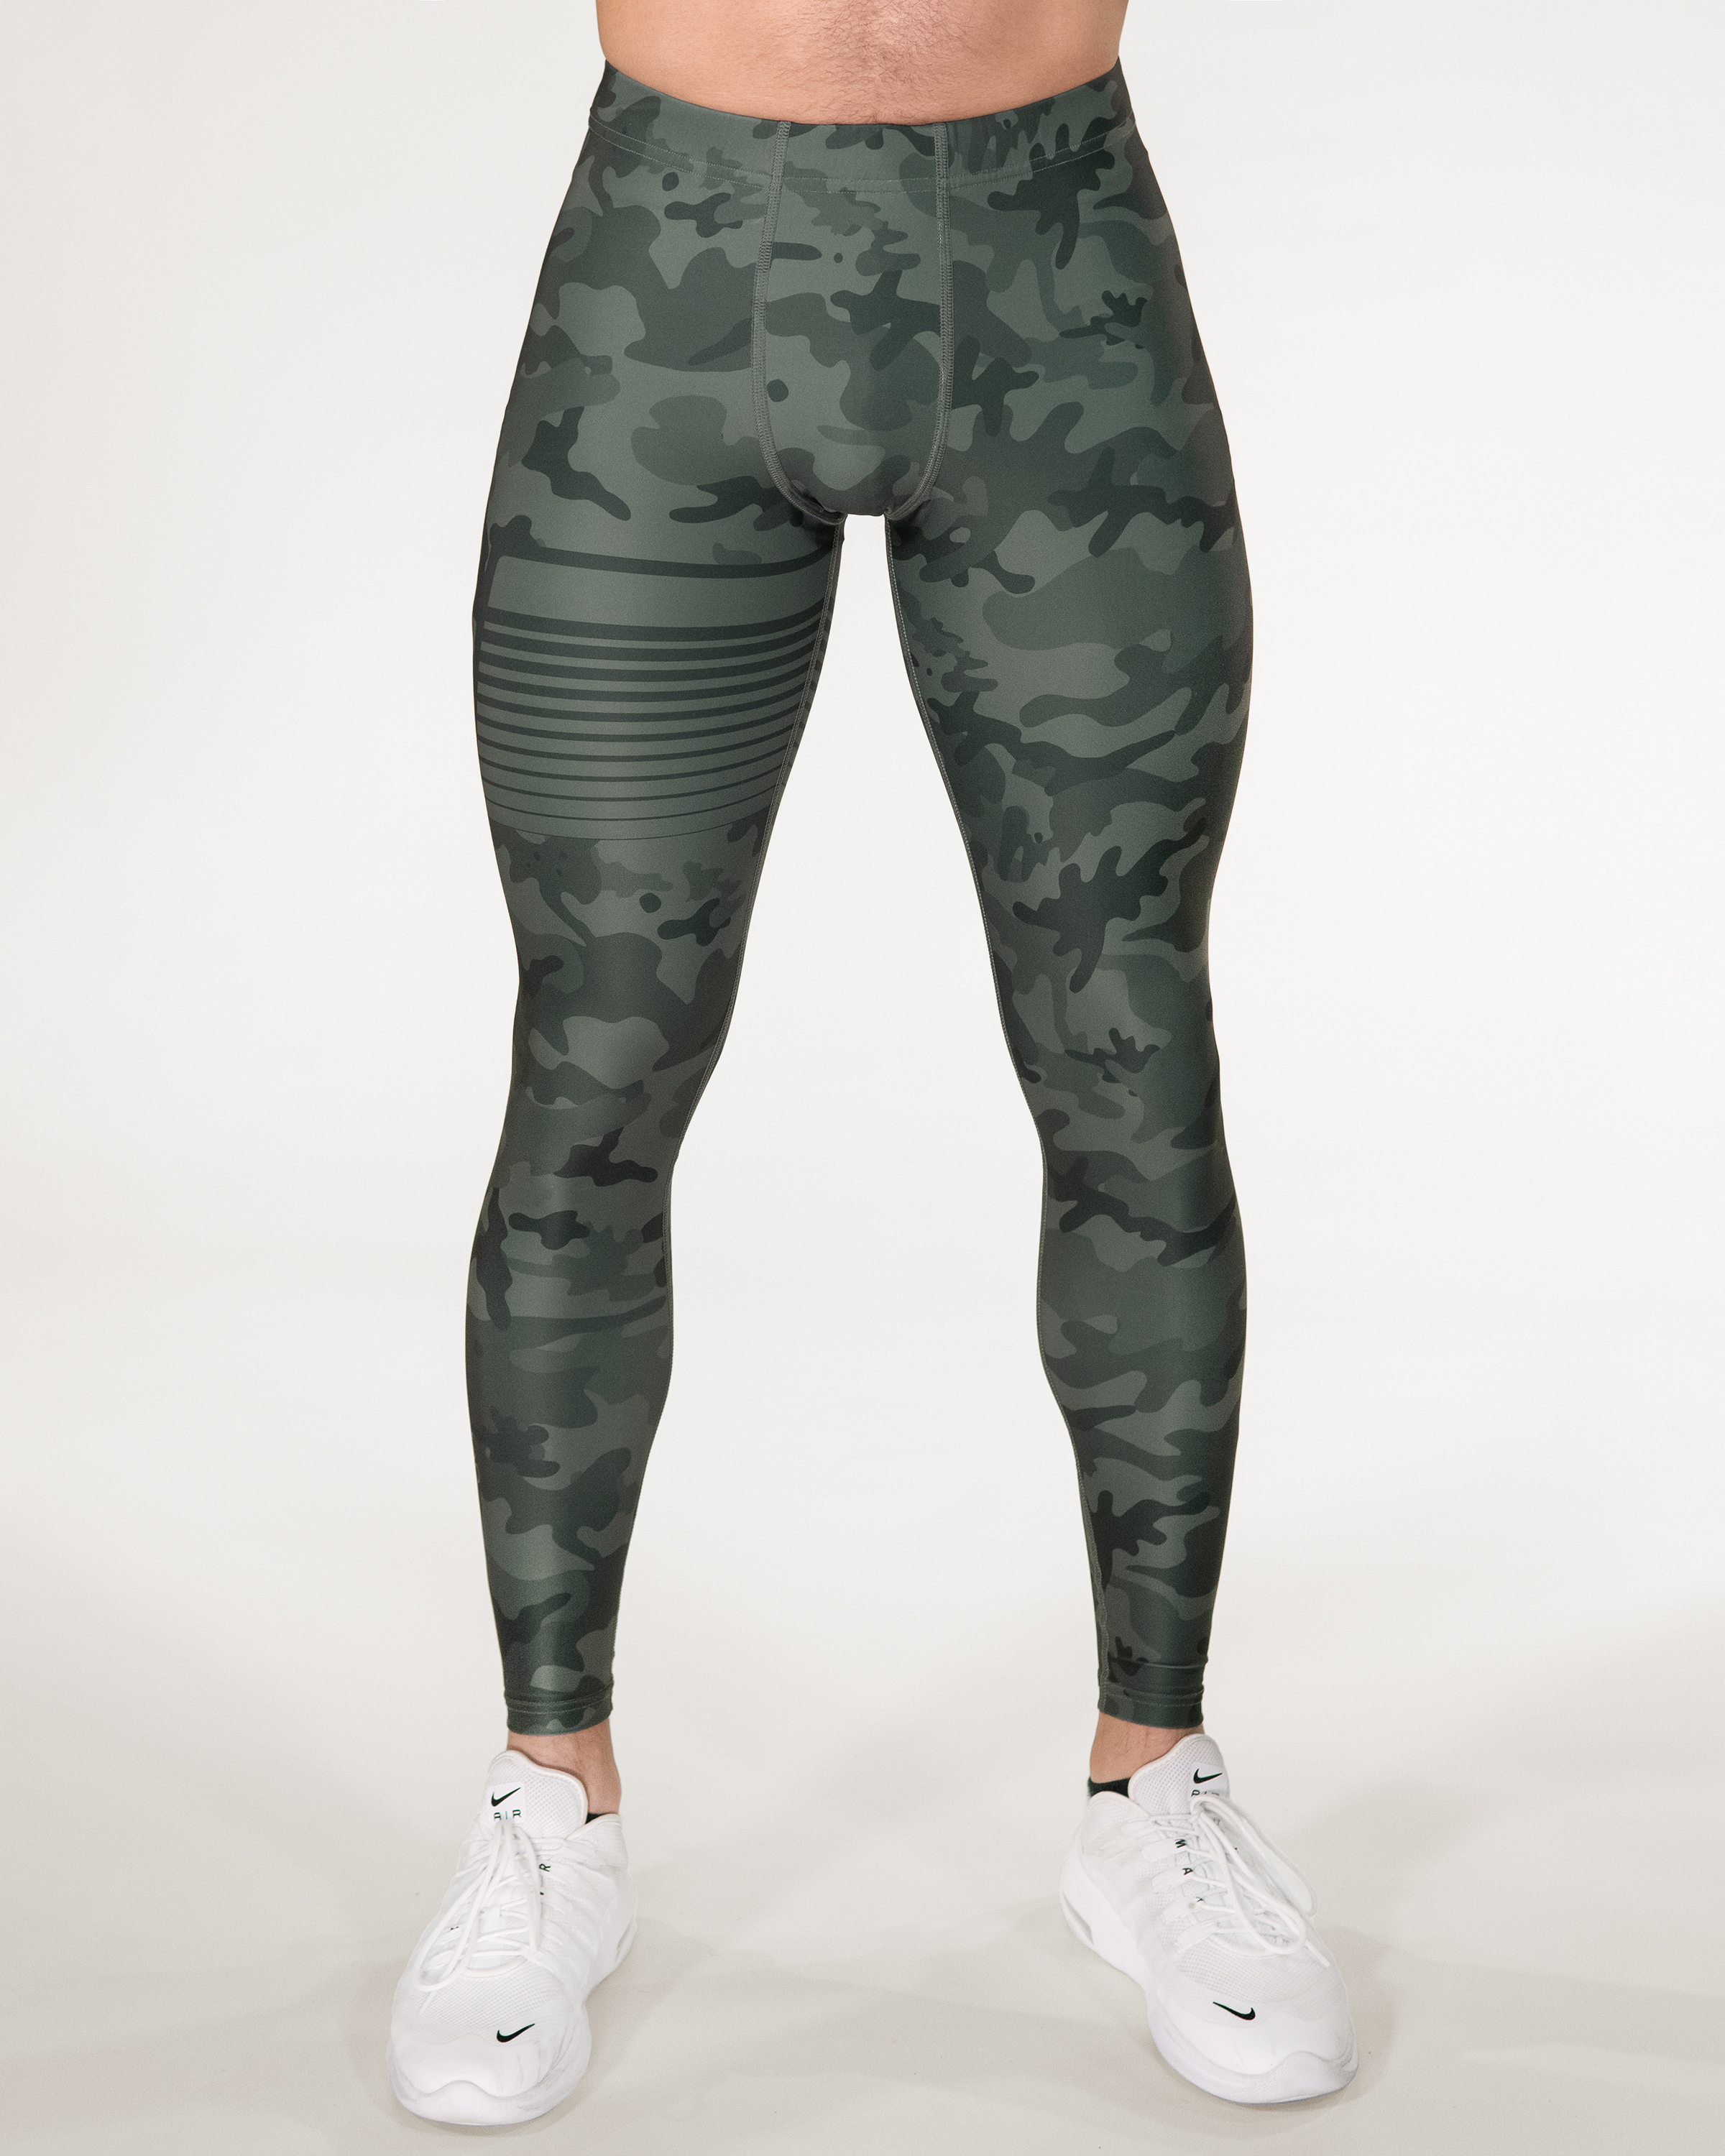 GAVELO Sniper Camo Green Compression Pants - Gavelo Official Store